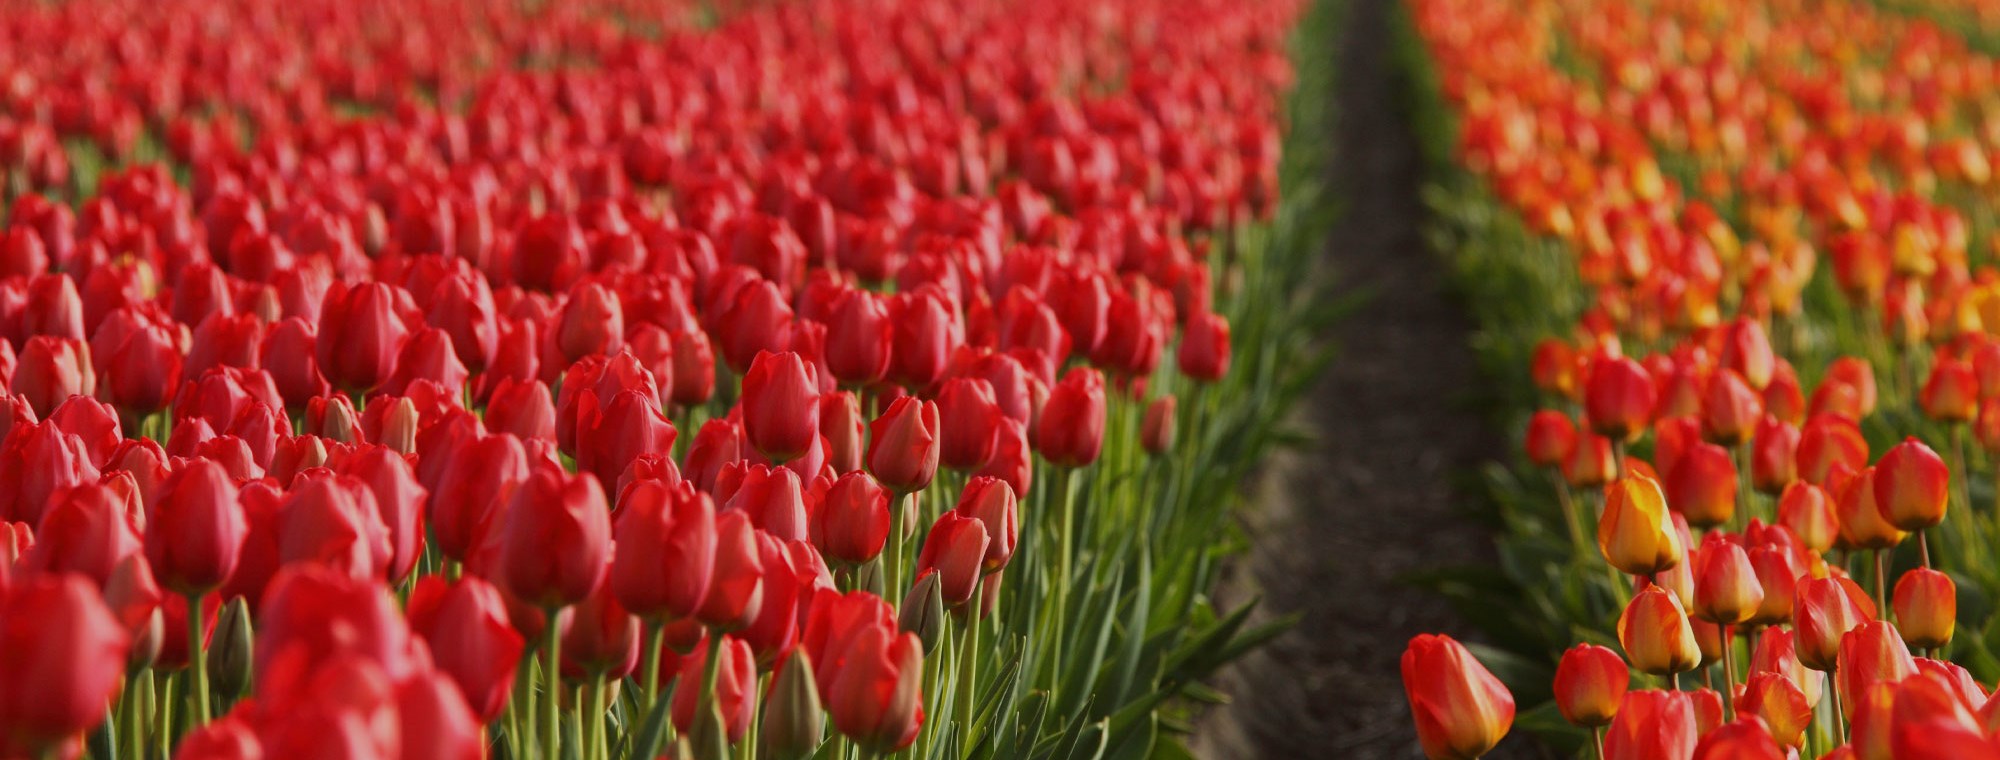 Netherlands tours of red tulips, Amsterdam